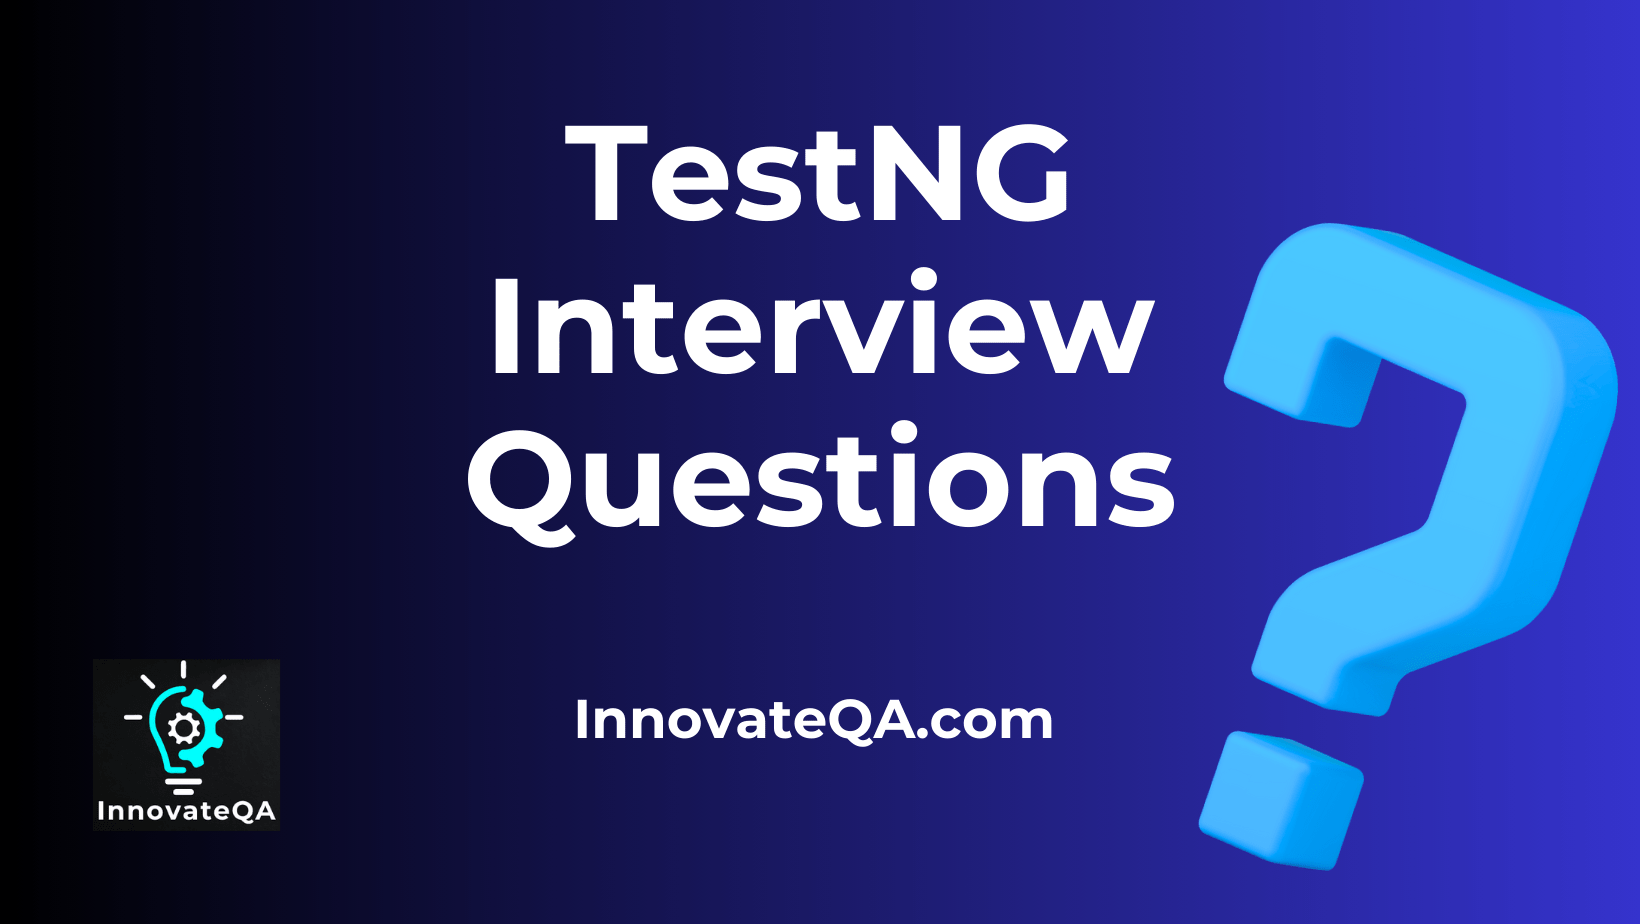 TestNG Interview Questions